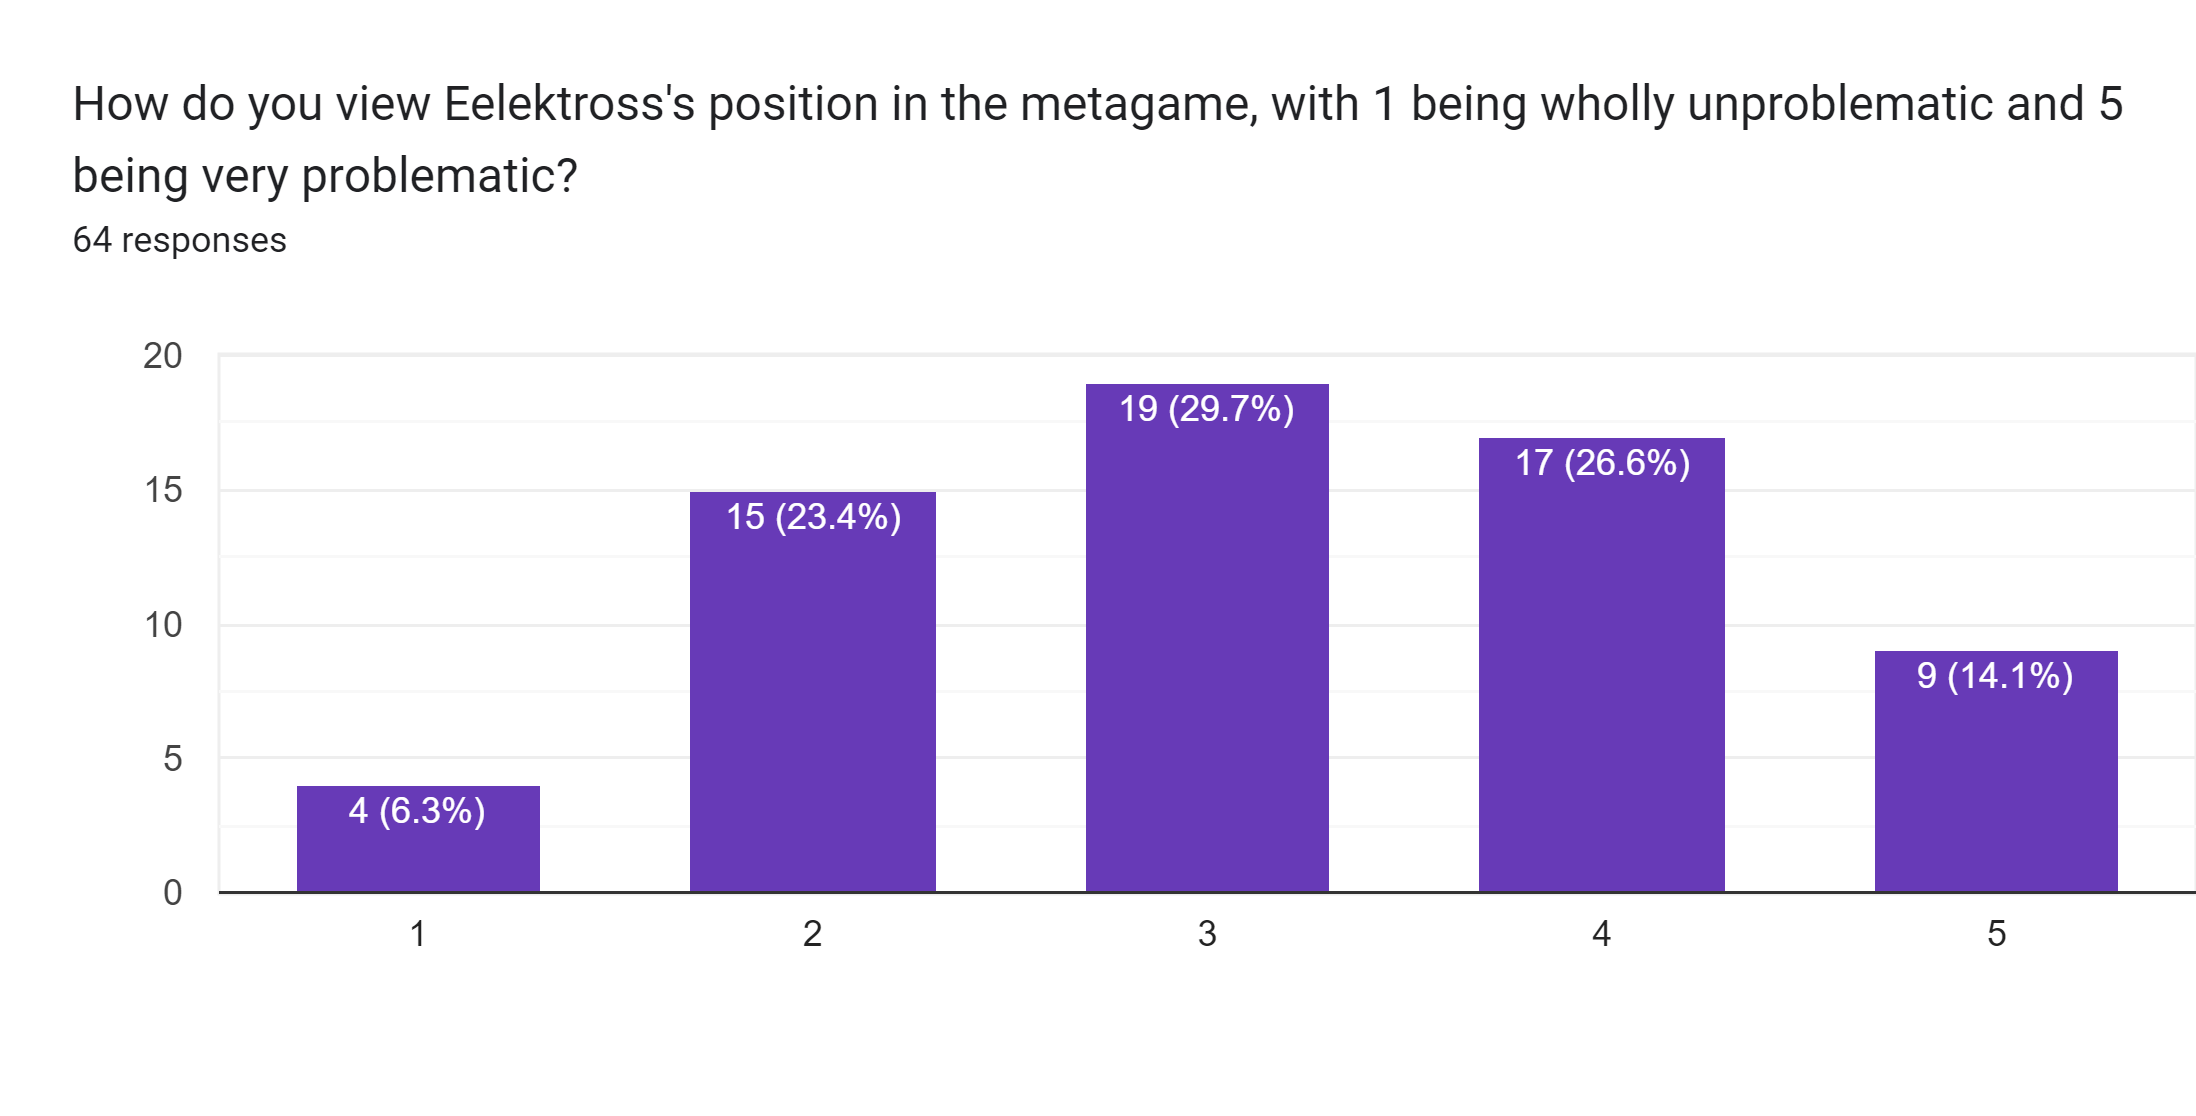 Forms response chart. Question title: How do you view Eelektross's position in the metagame, with 1 being wholly unproblematic and 5 being very problematic?. Number of responses: 64 responses.